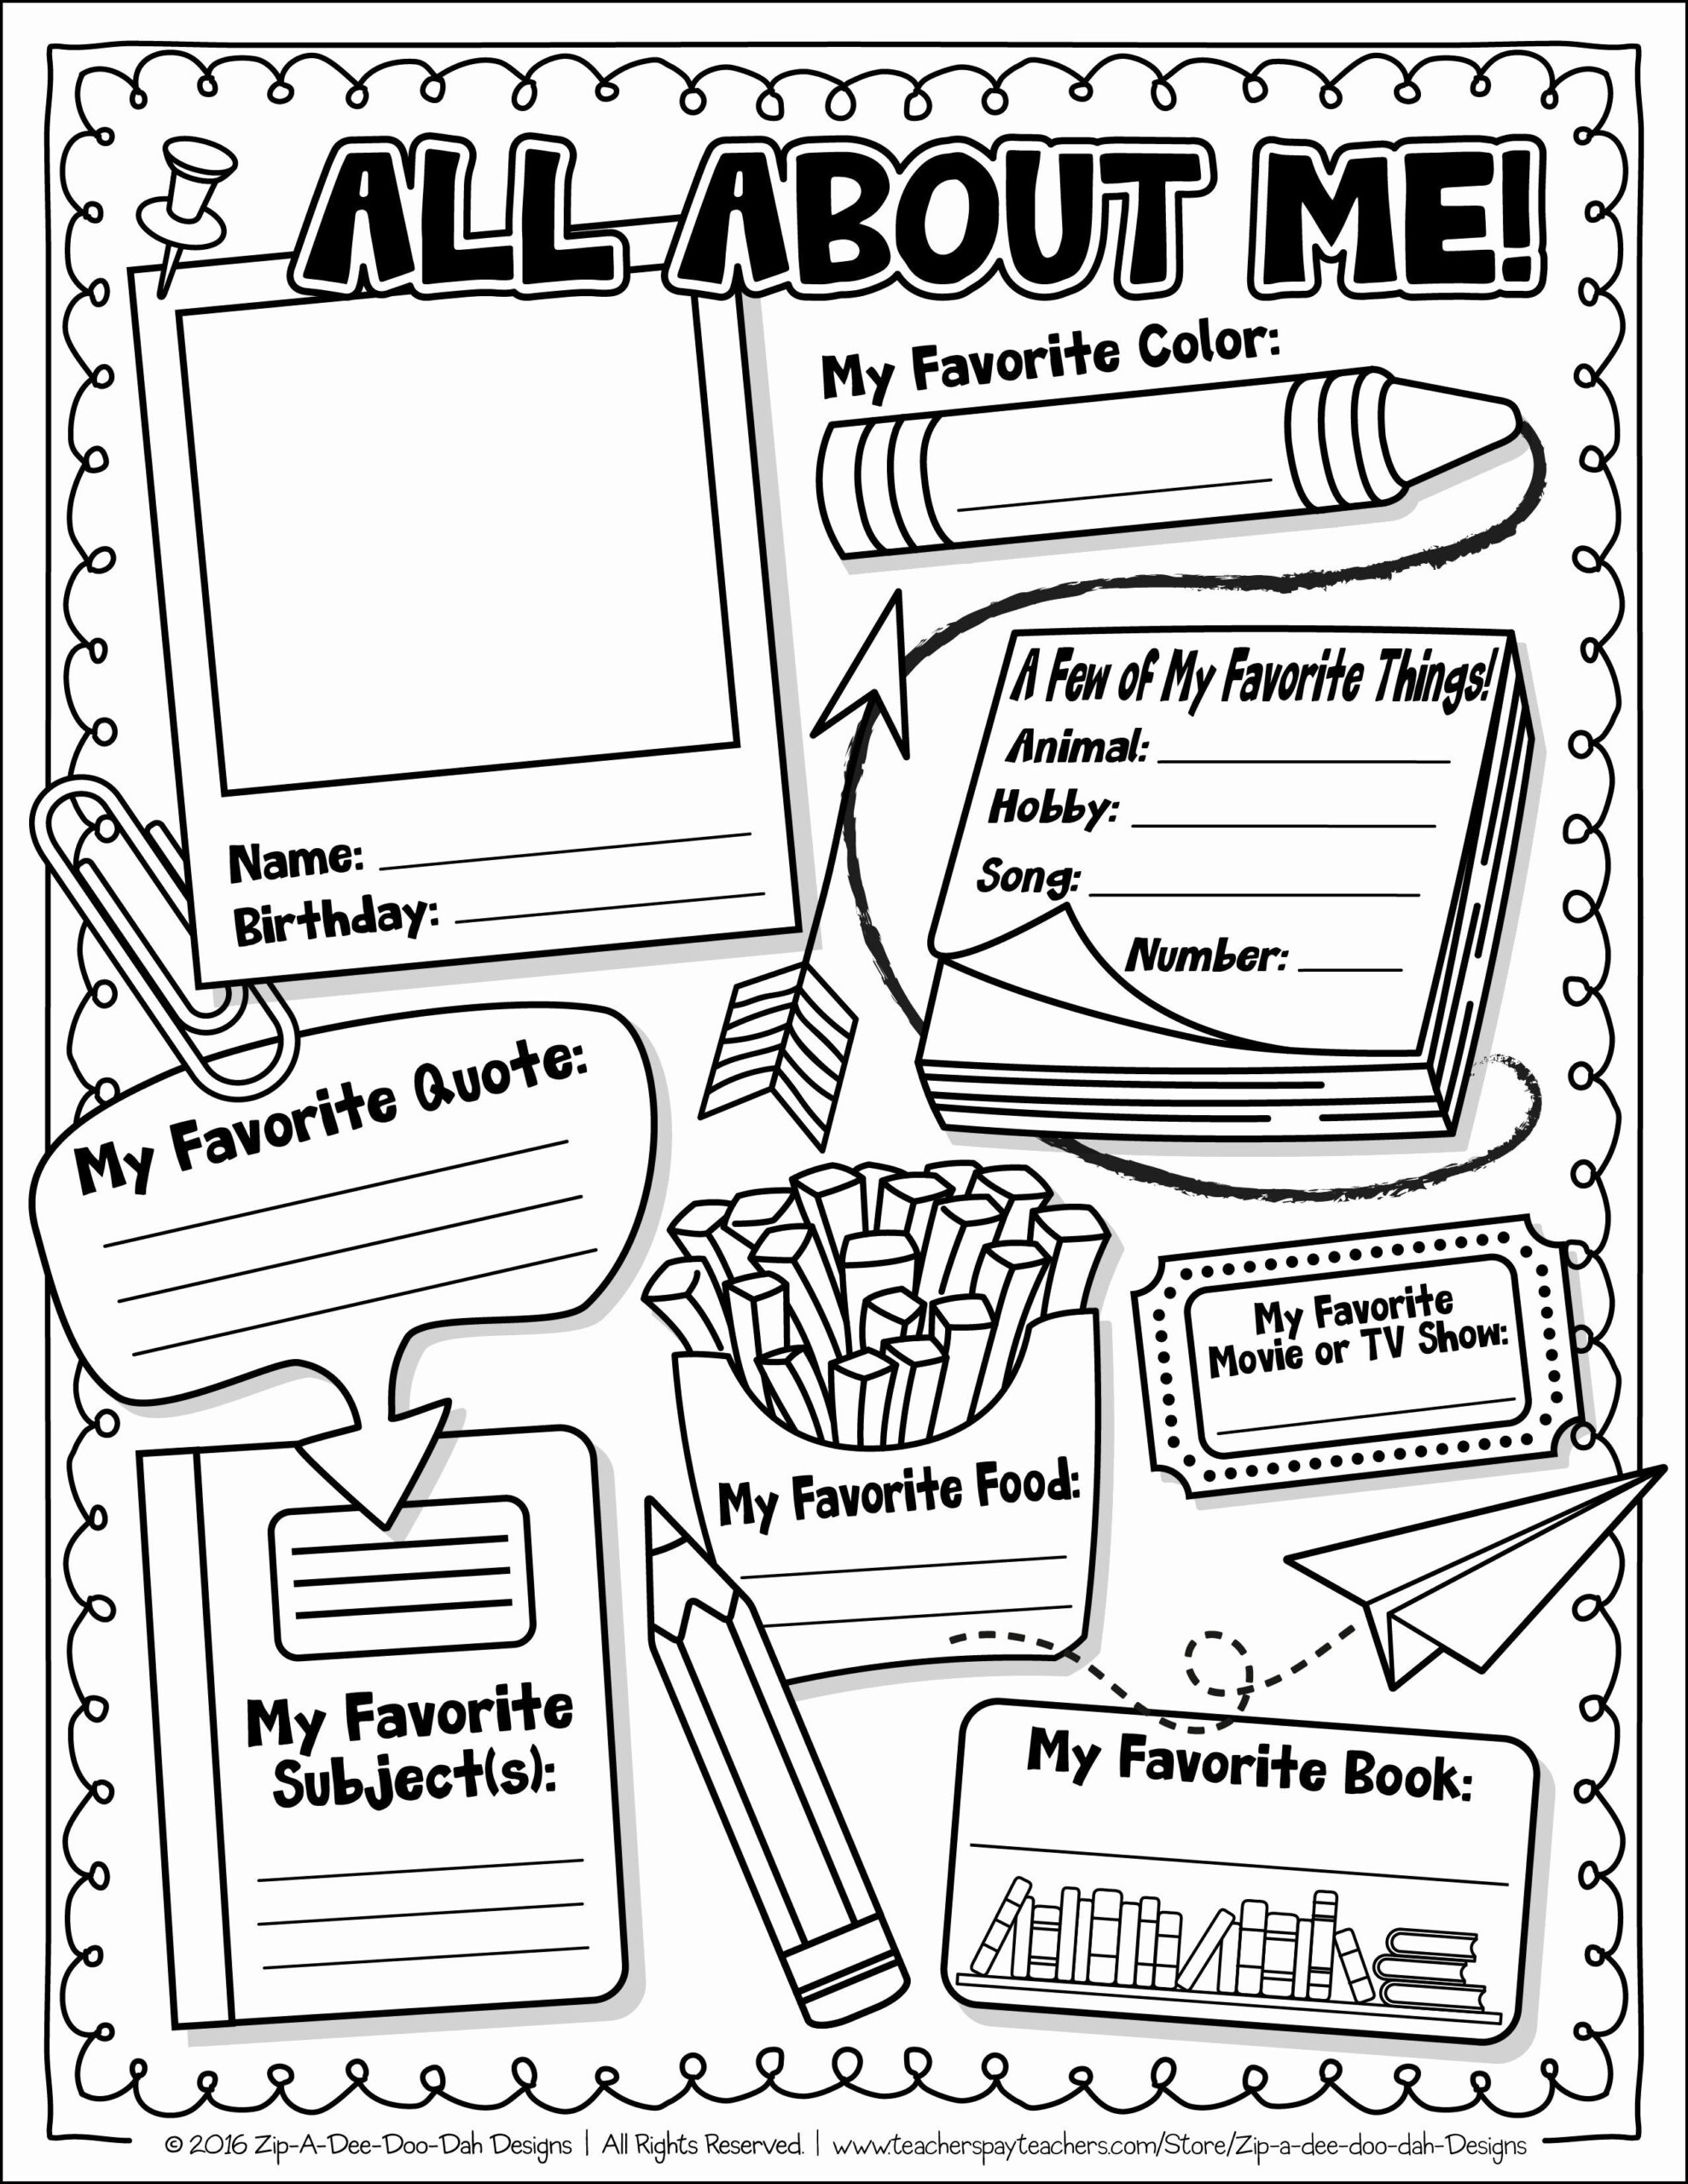 All About Me Printable Worksheet Luxury All About Me Printables 